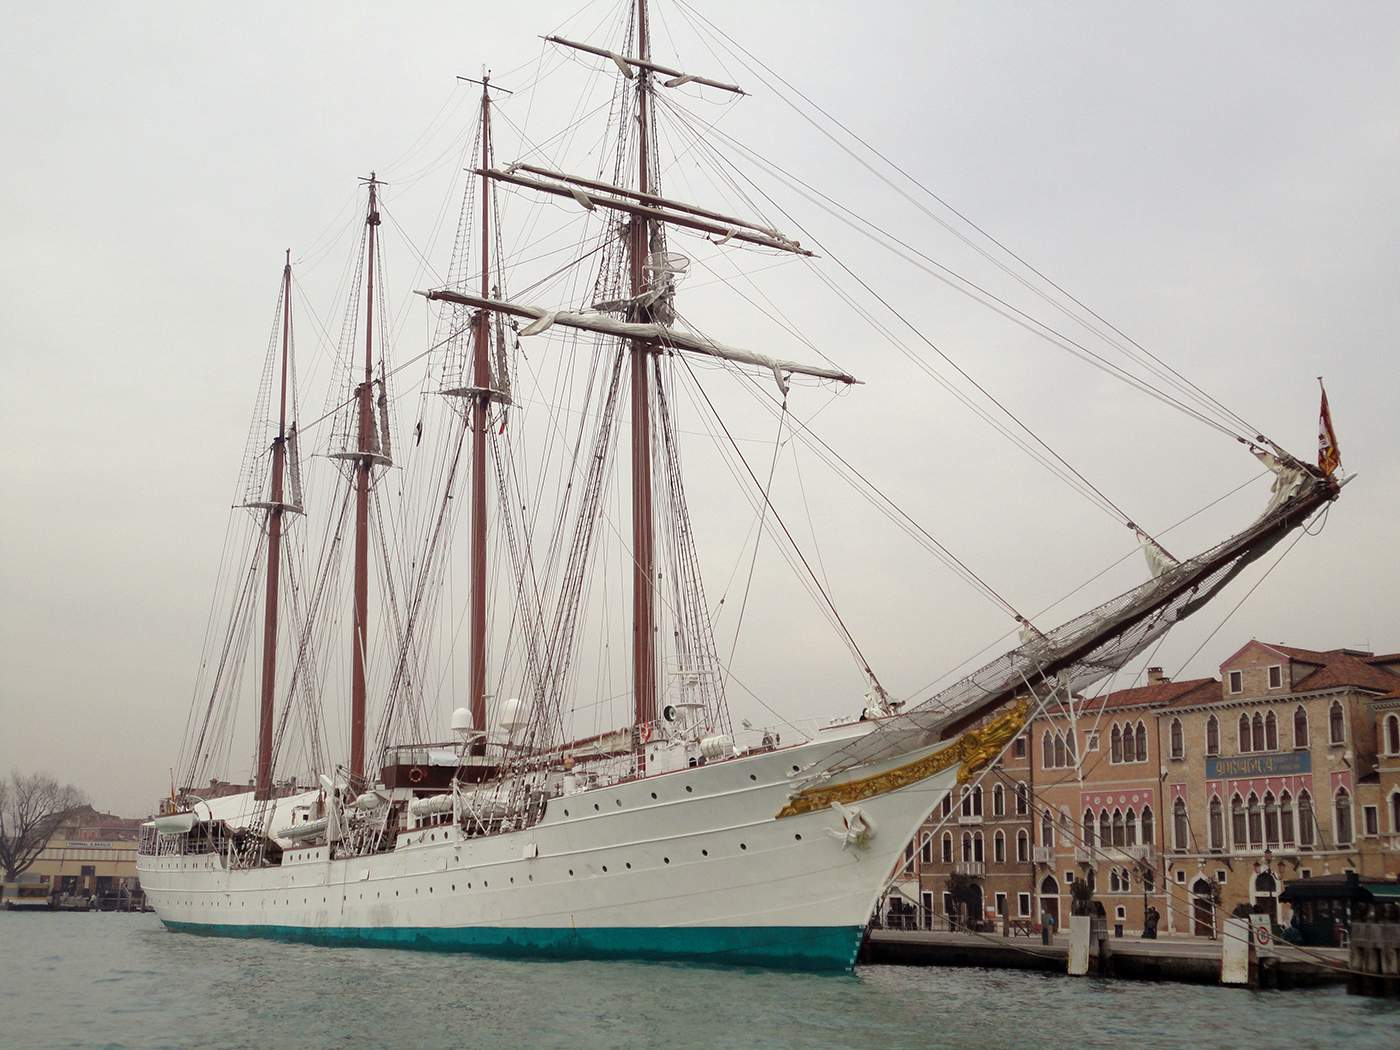 A passenger ship docked at the Port of Venice